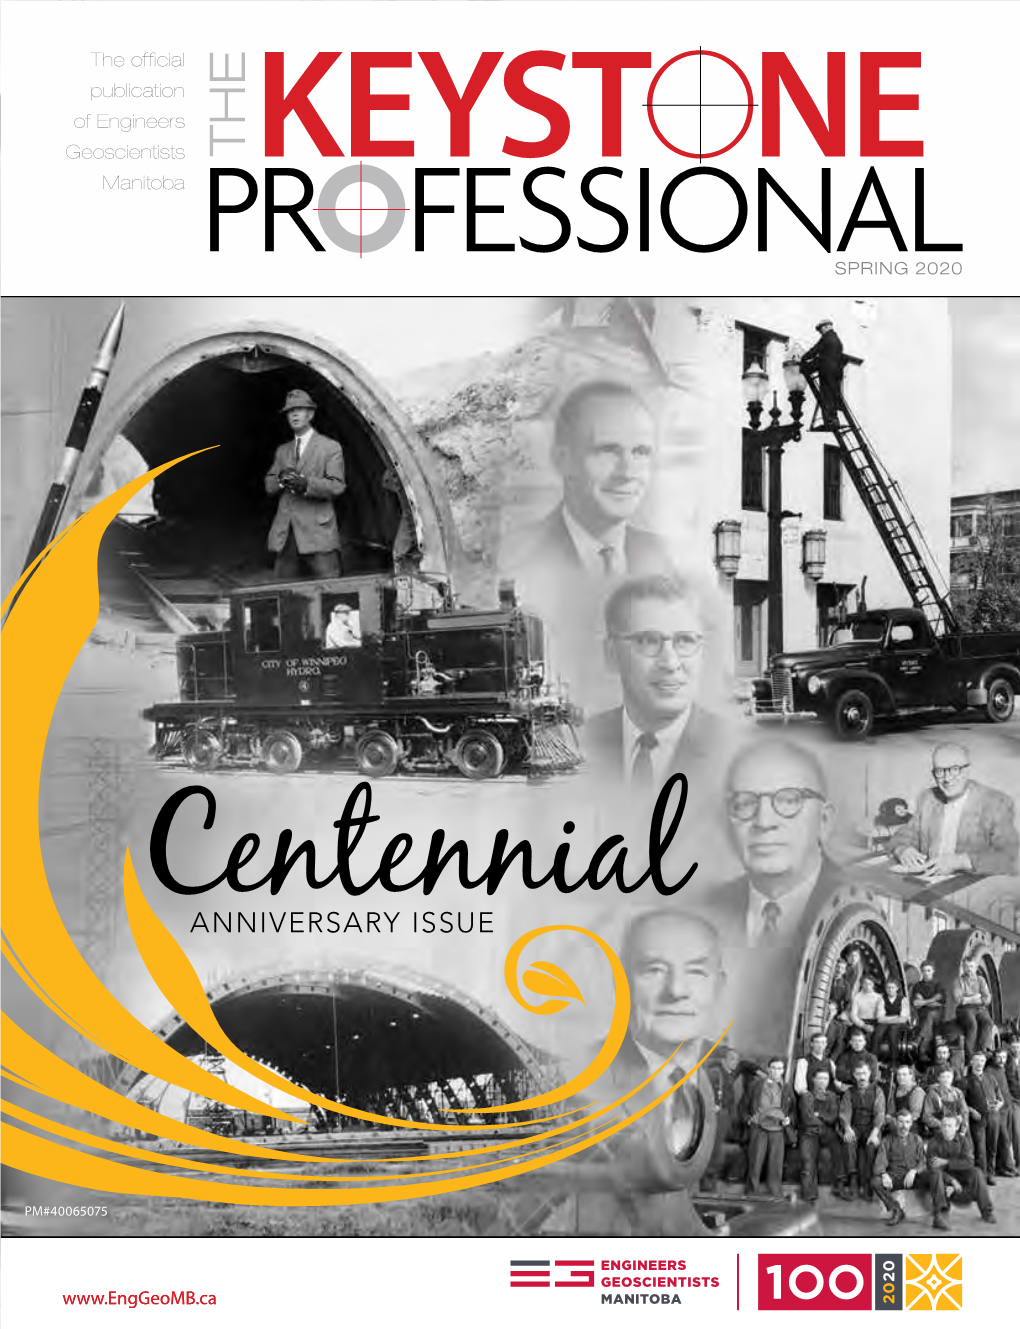 Centennial Issue of the Keystone Professional